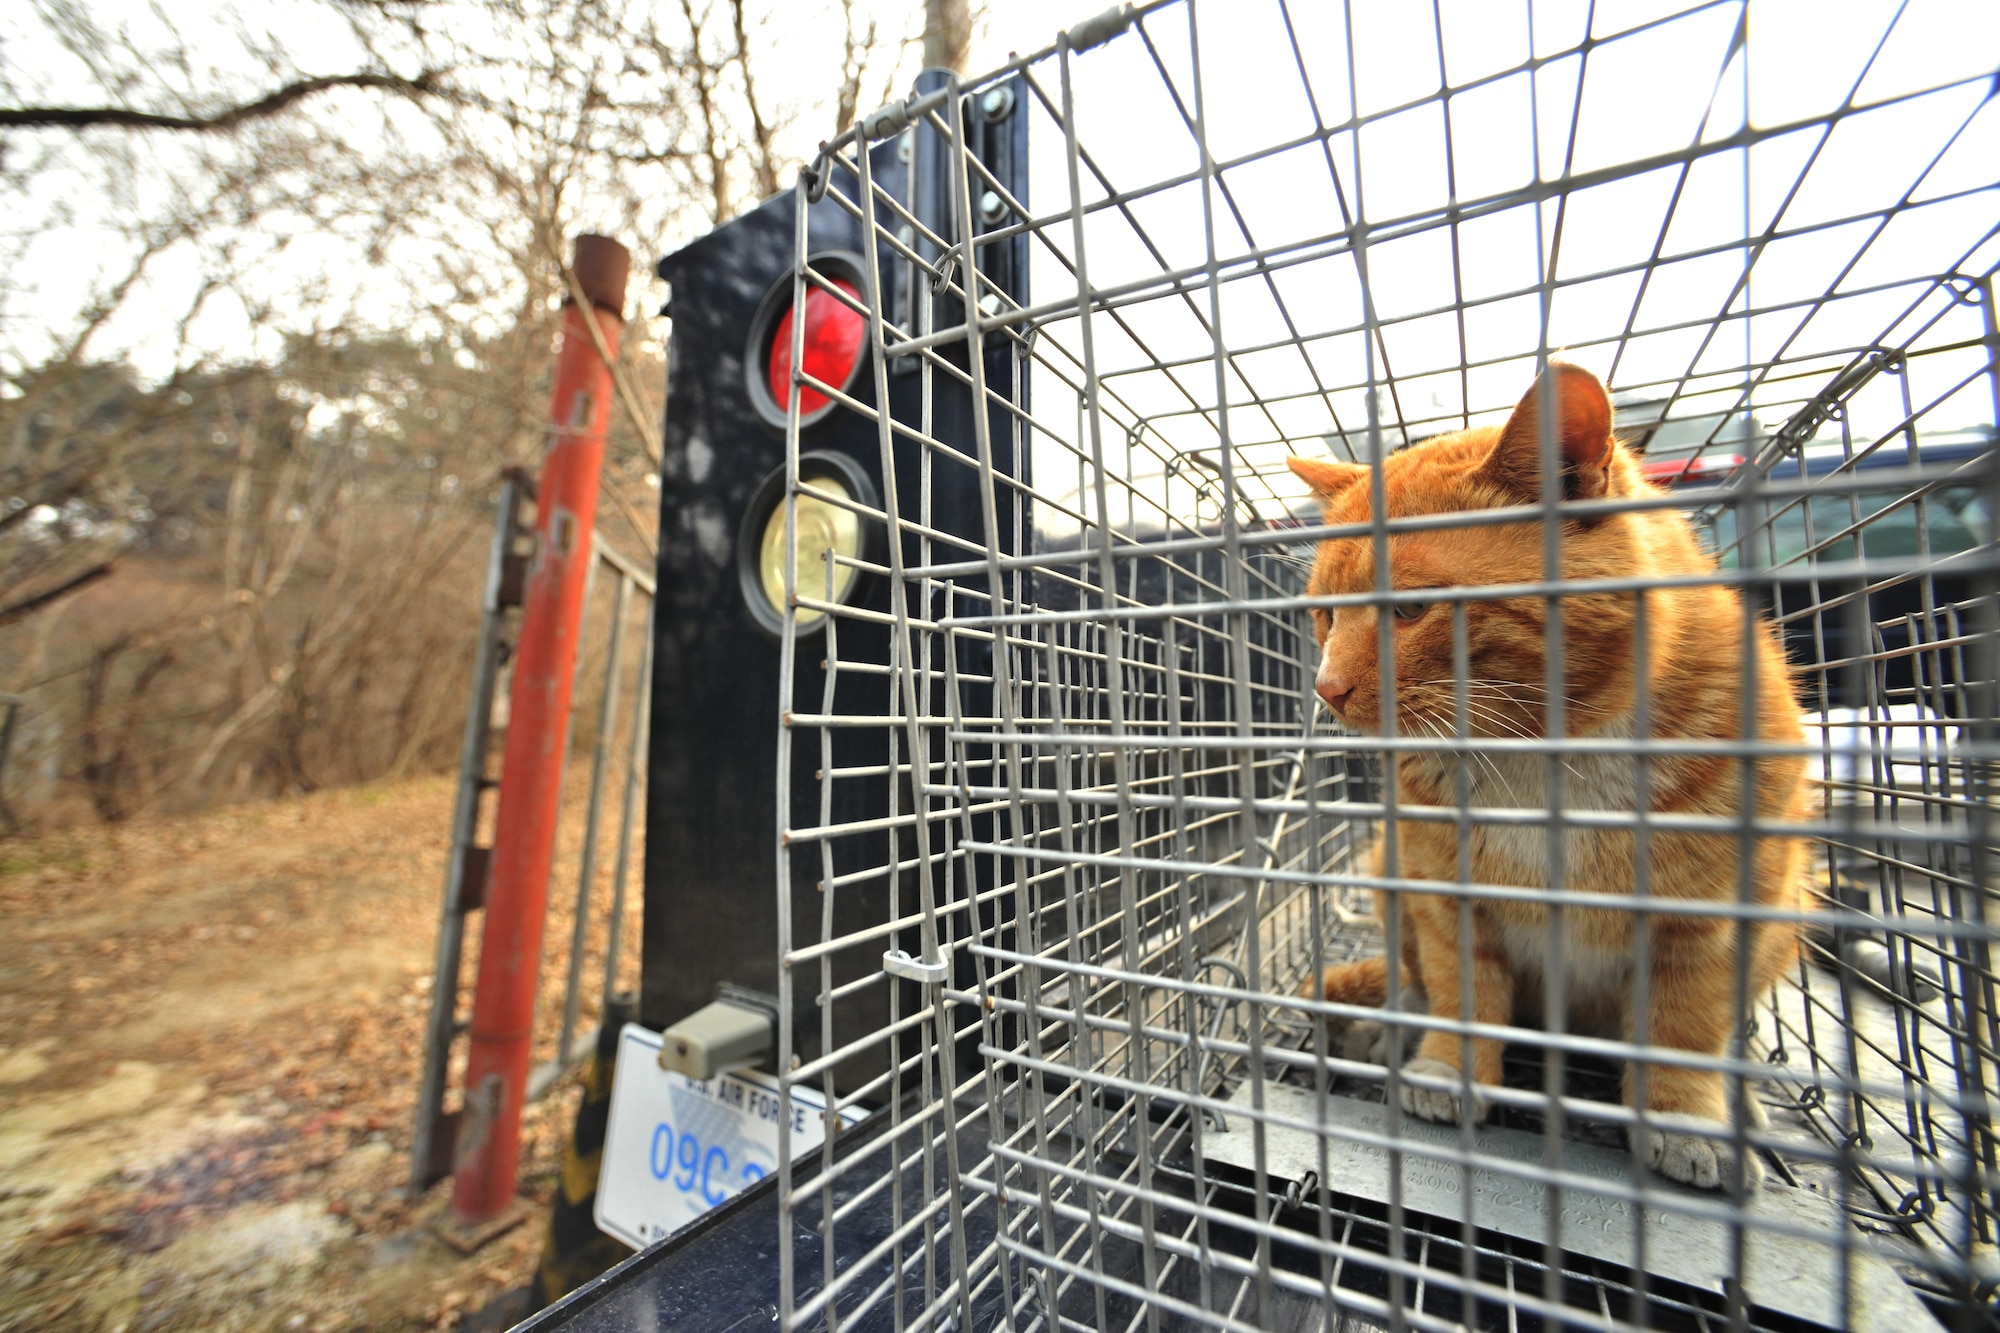 A stray cat is captured by a trap set by 8th Civil Engineer Squadron pest management Feb. 23, 2012 at Kunsan Air Base, Republic of Korea and the cat is taken to an animal shelter in Gunsan City, Republic of Korea. Members of the 8th CES pest management section have eight live traps scattered around base, which are checked twice a day. (U.S. Air Force photo by Senior Airman Brittany Y. Auld/Released)